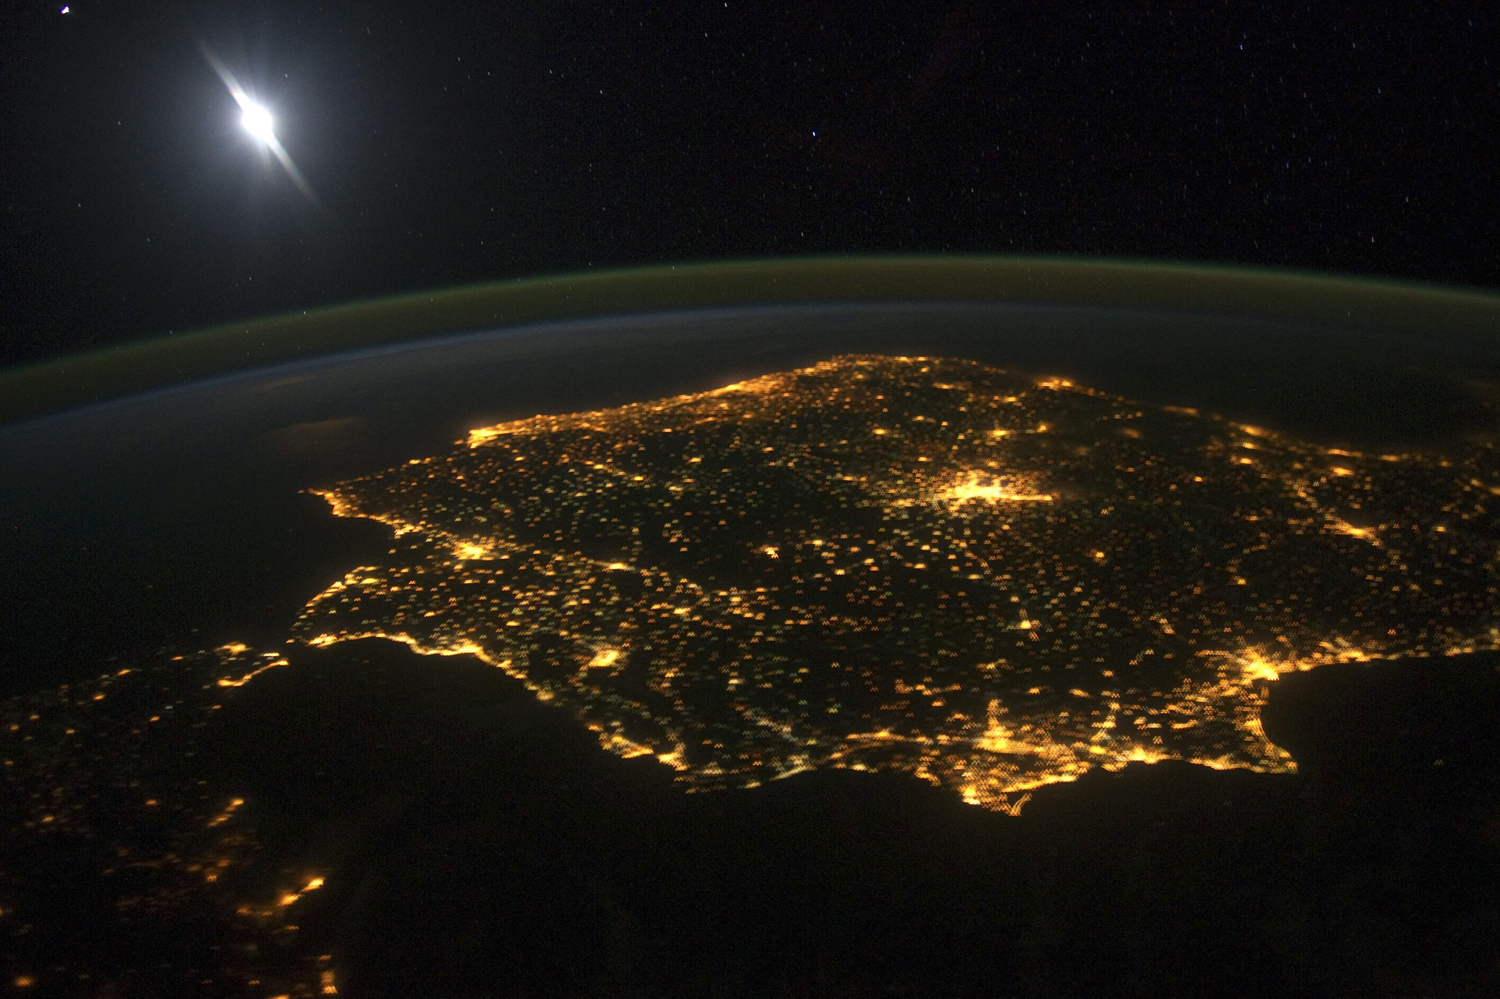 This image released on March 7, 2014 and taken from the International Space Station (ISS) shows the Iberian Peninsula including Spain and Portugal at night. The lights from human settlements reveal where the major towns and activity are. The large mass of light in the middle is Madrid, Spain.